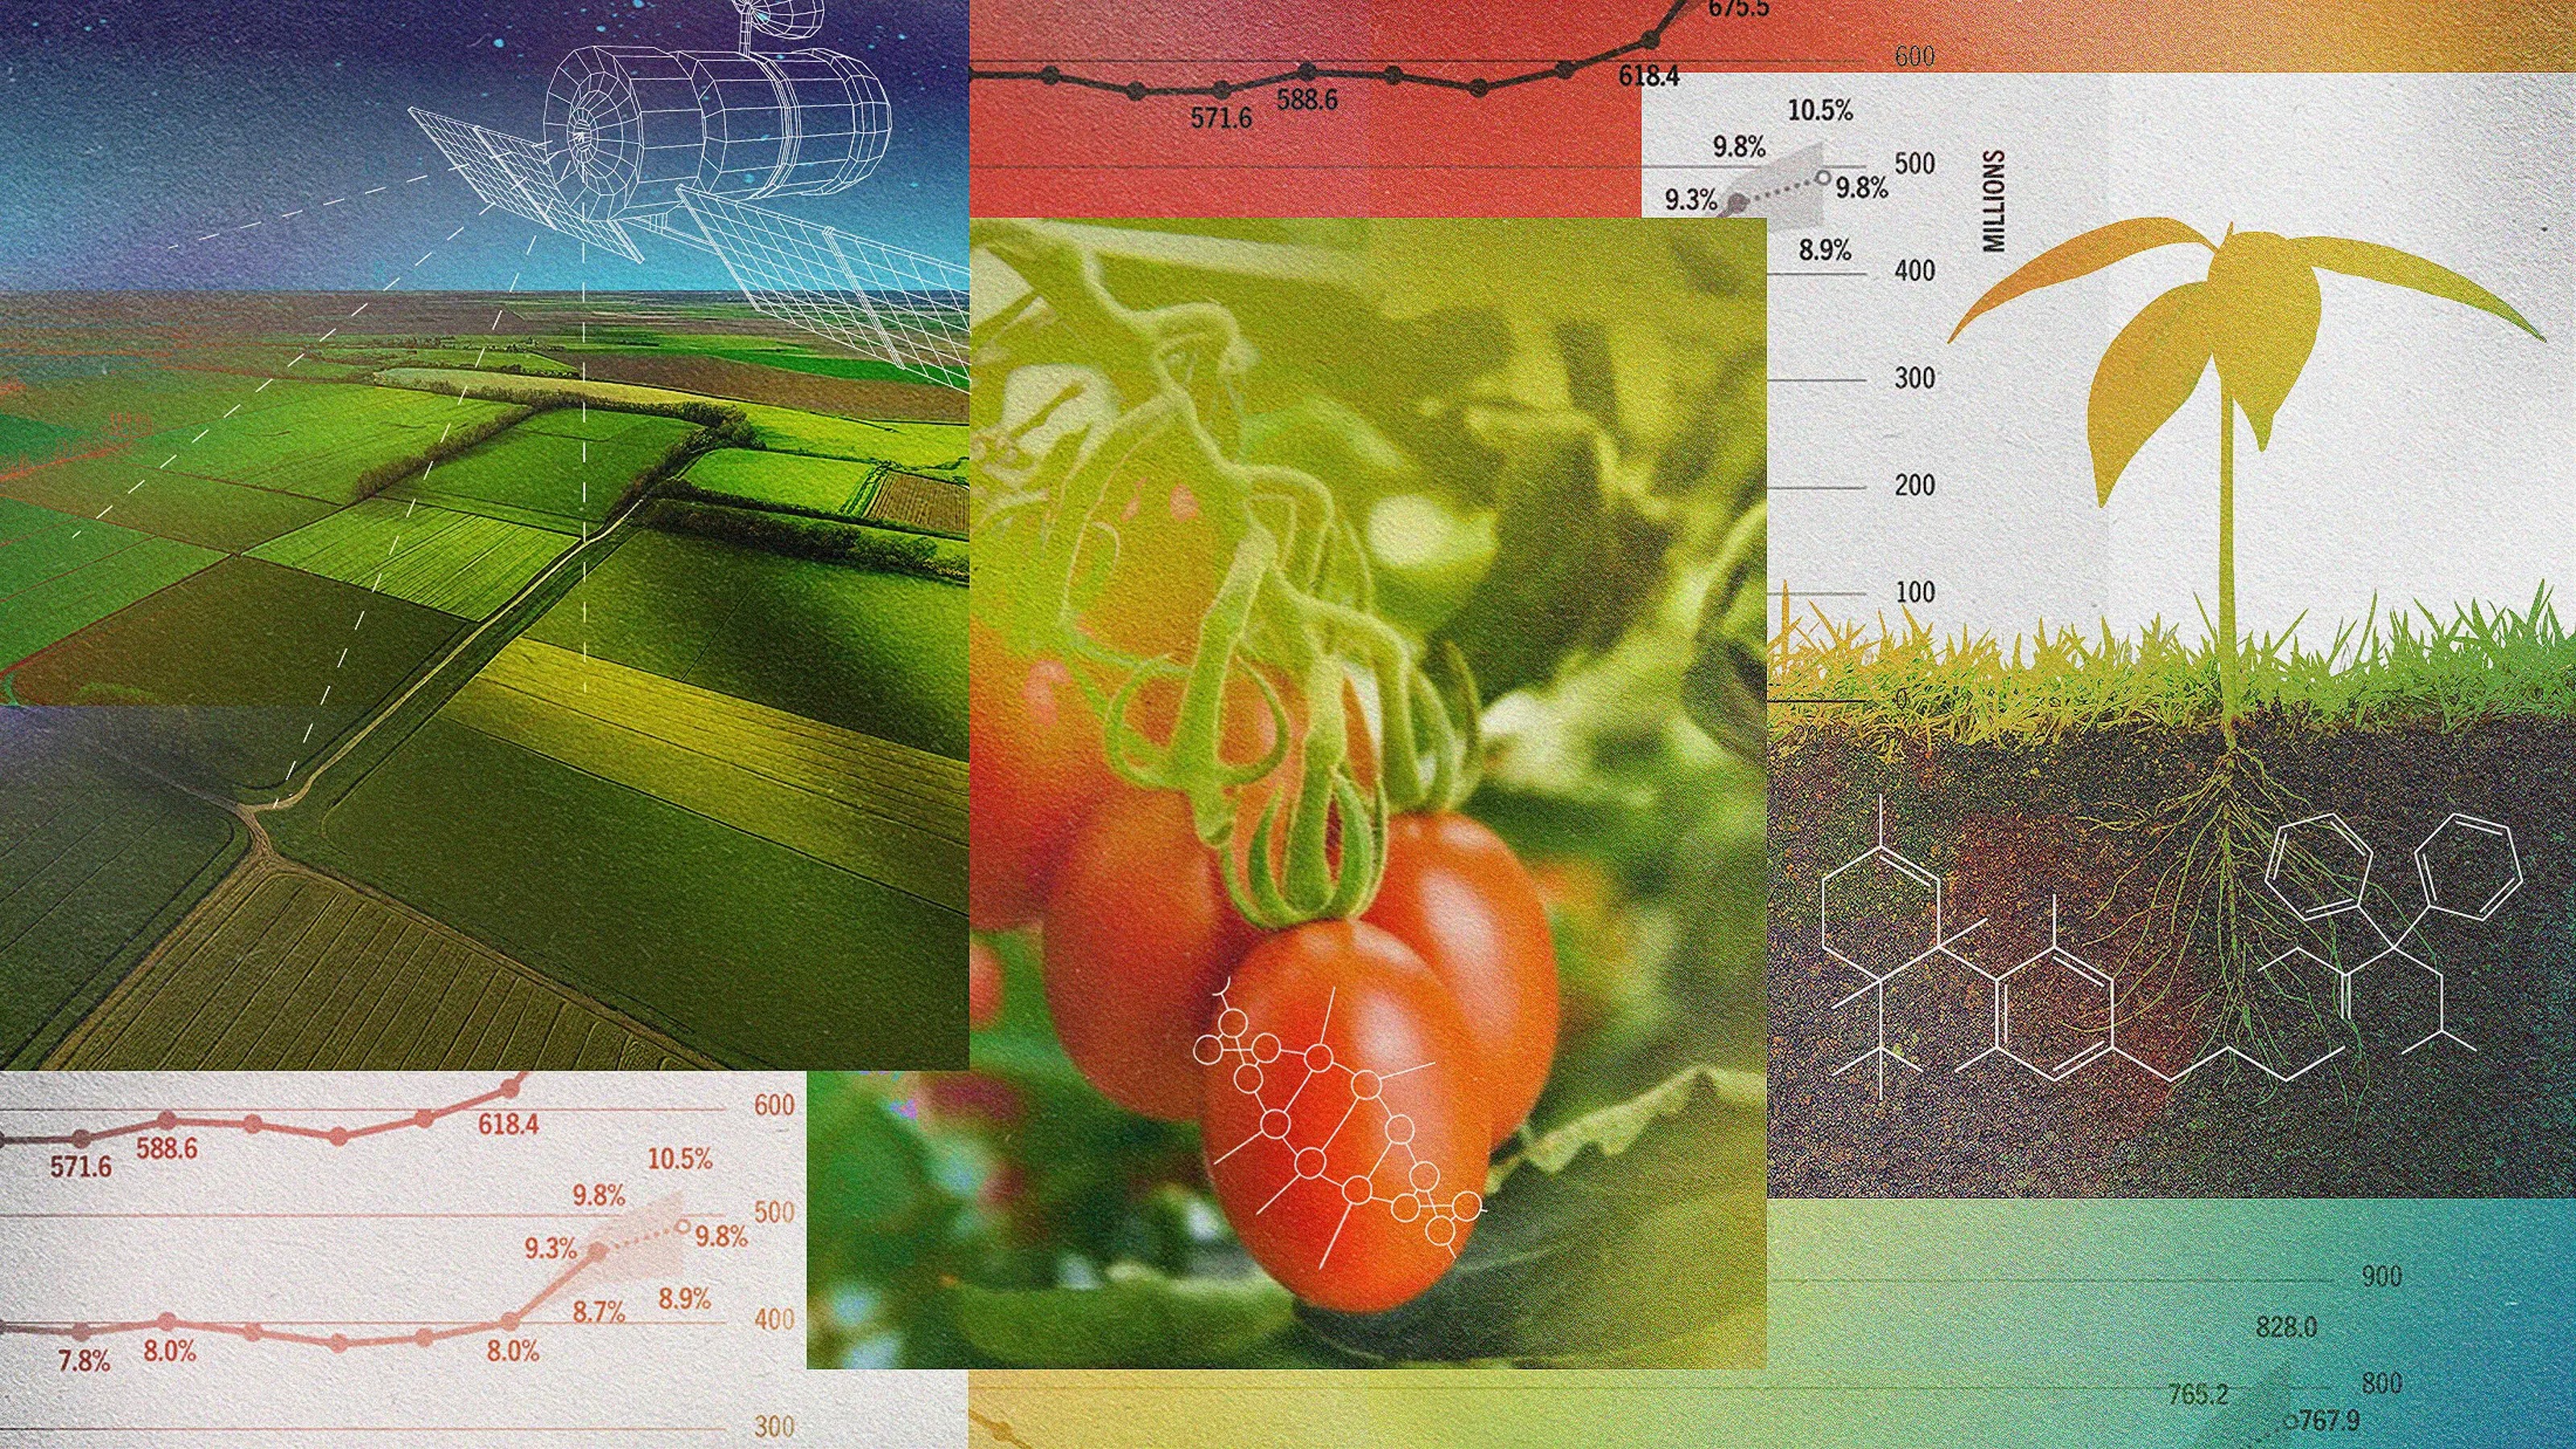 A collage of agricultural imagery including a drone, fields, tomatoes, a plant sprout diagram, and various charts and graphs related to farming data.